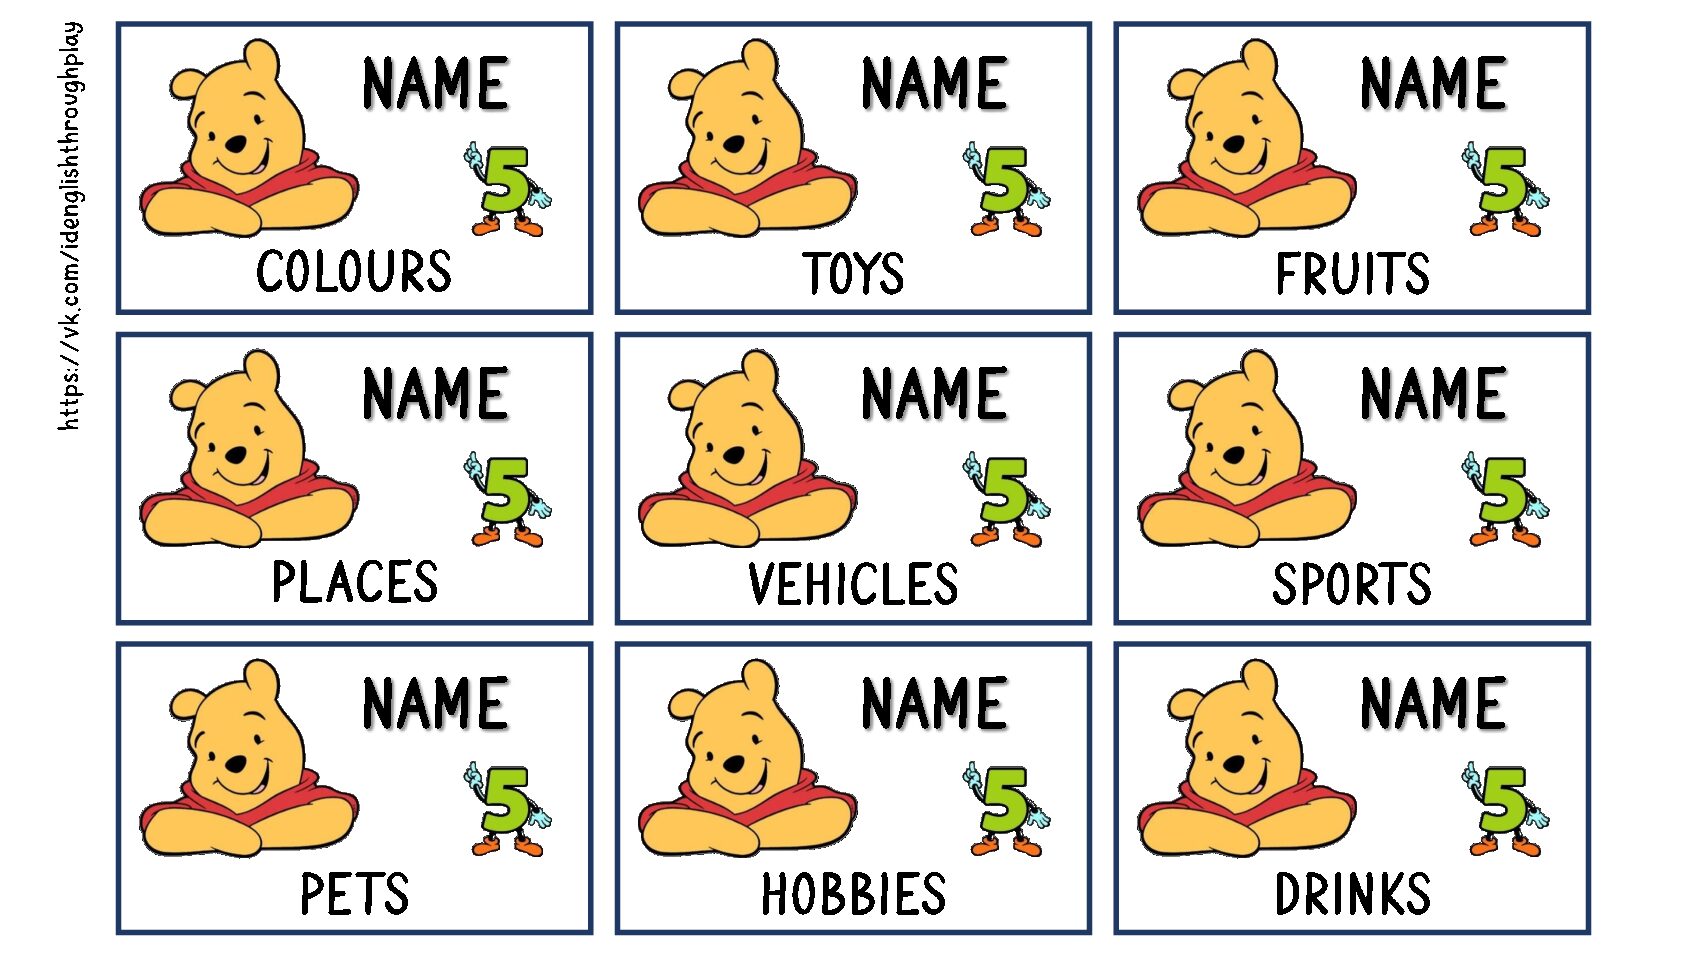 Name Five Things Challenge Cards for Children - Language Advisor